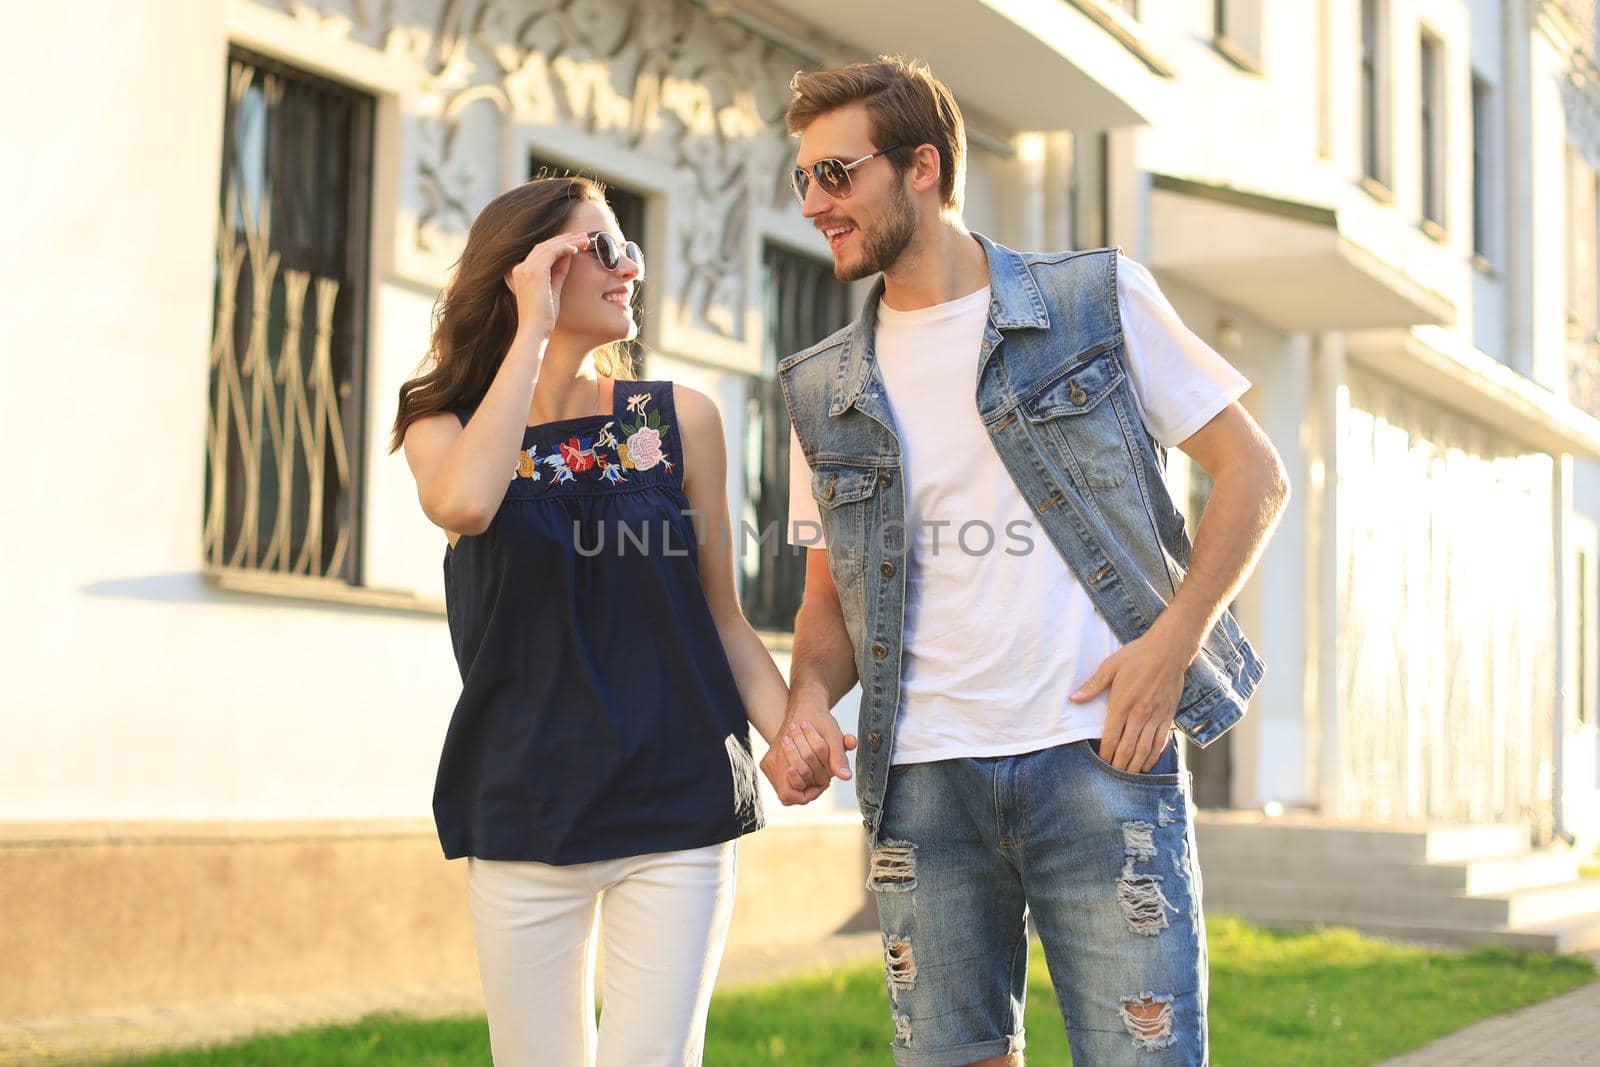 Image of lovely happy couple in summer clothes smiling and holding hands together while walking through city street